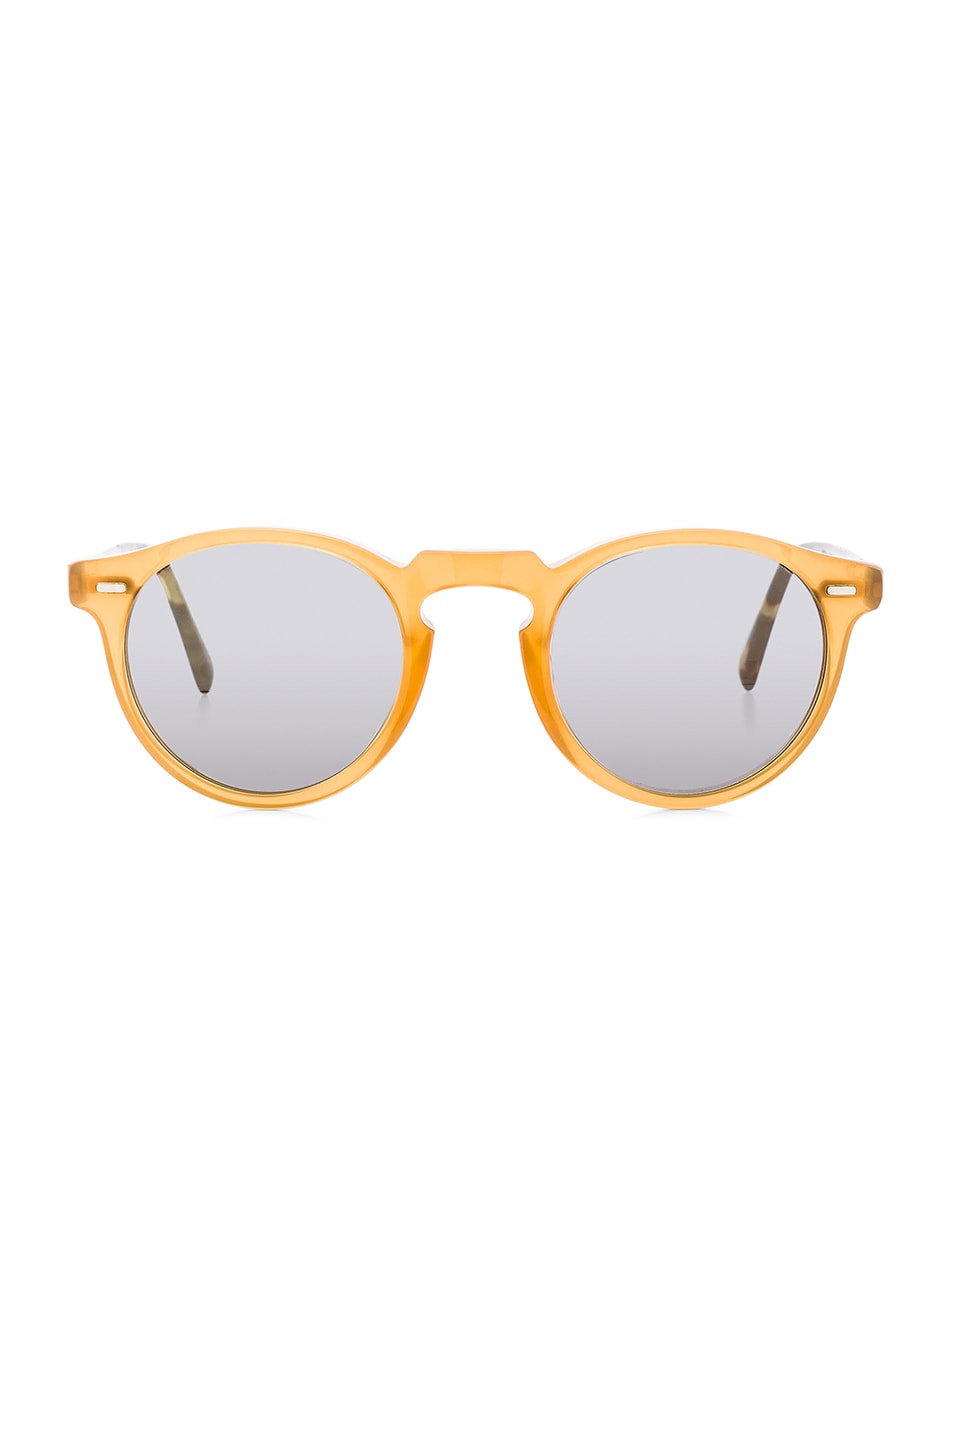 Image 1 of Oliver Peoples Gregory Peck Limited Edition Sunglasses in Amber Vintage